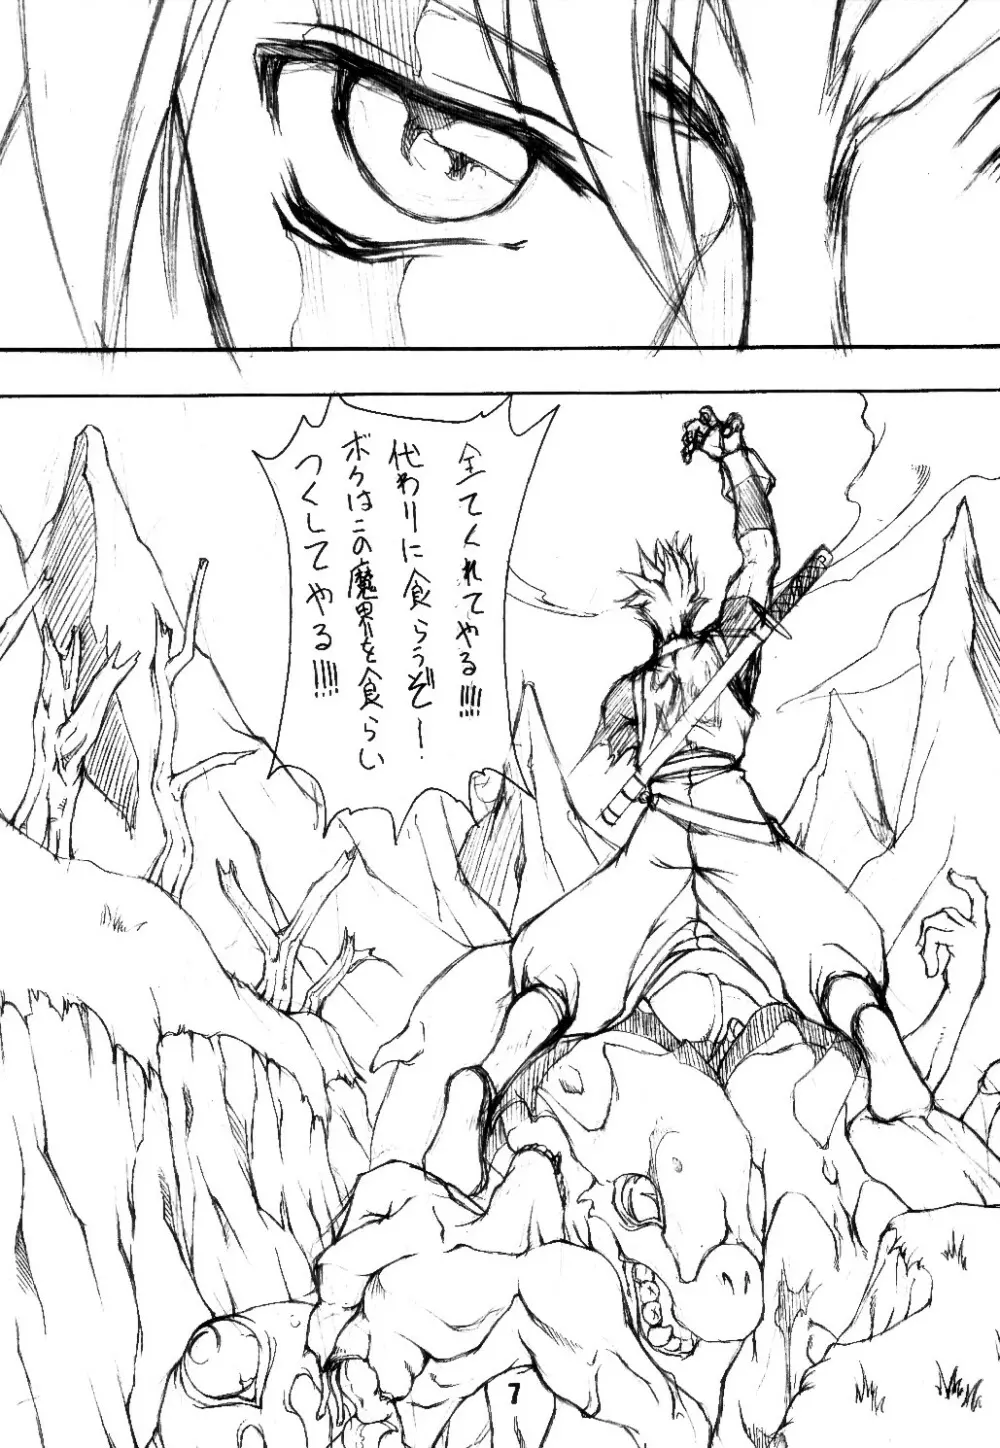 BATTLE CRY 戦吼 ～Prologue～ - page6